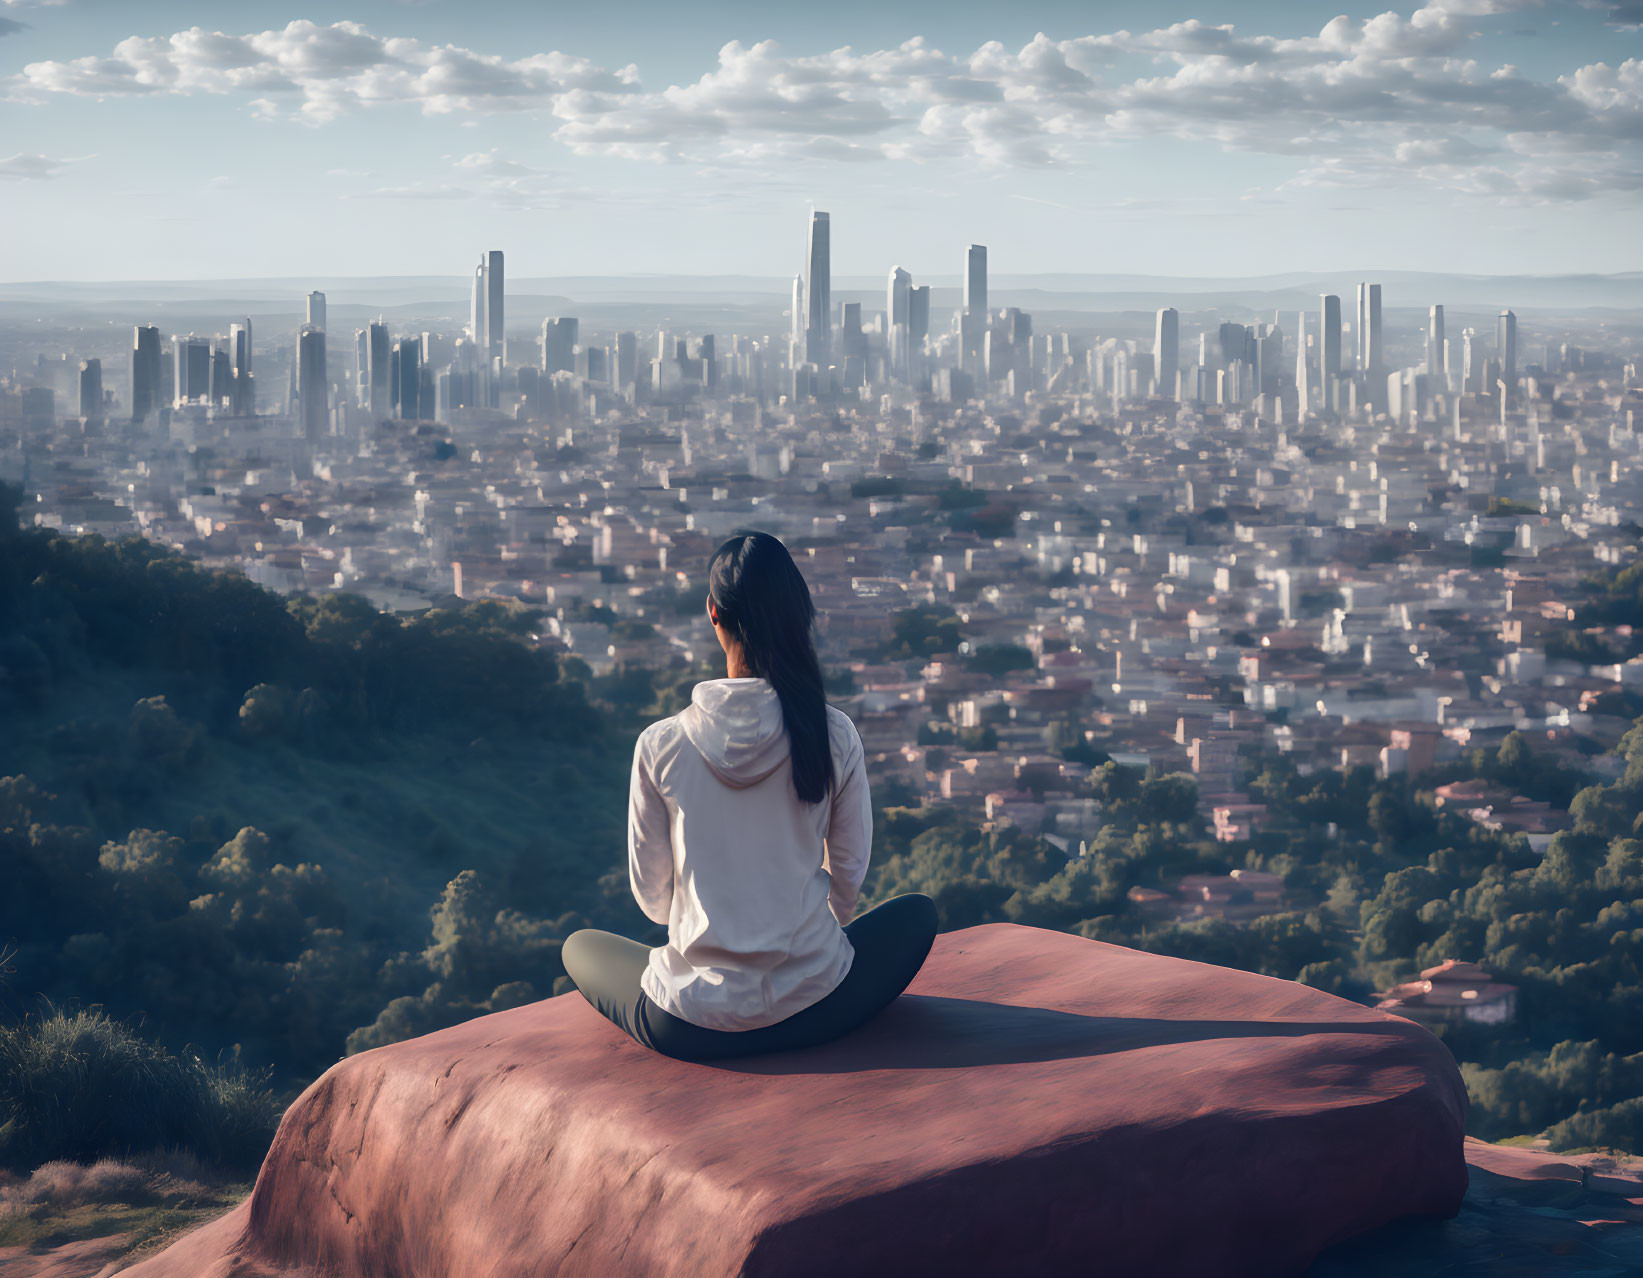 Person sitting on rock gazes at vast cityscape with towering skyscrapers